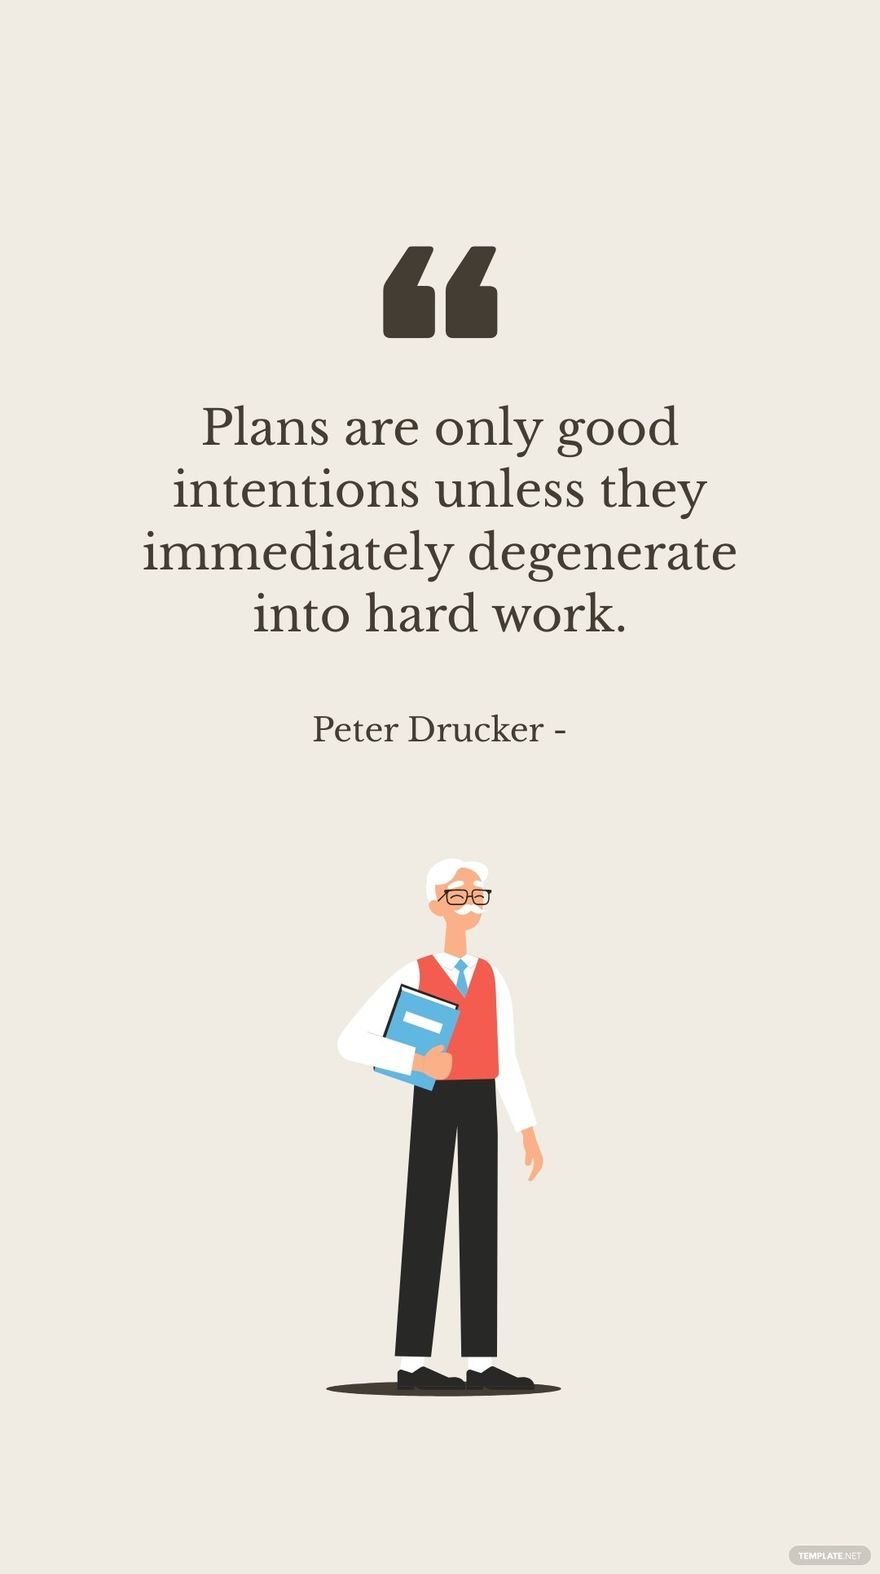 Peter Drucker - Plans are only good intentions unless they immediately degenerate into hard work.